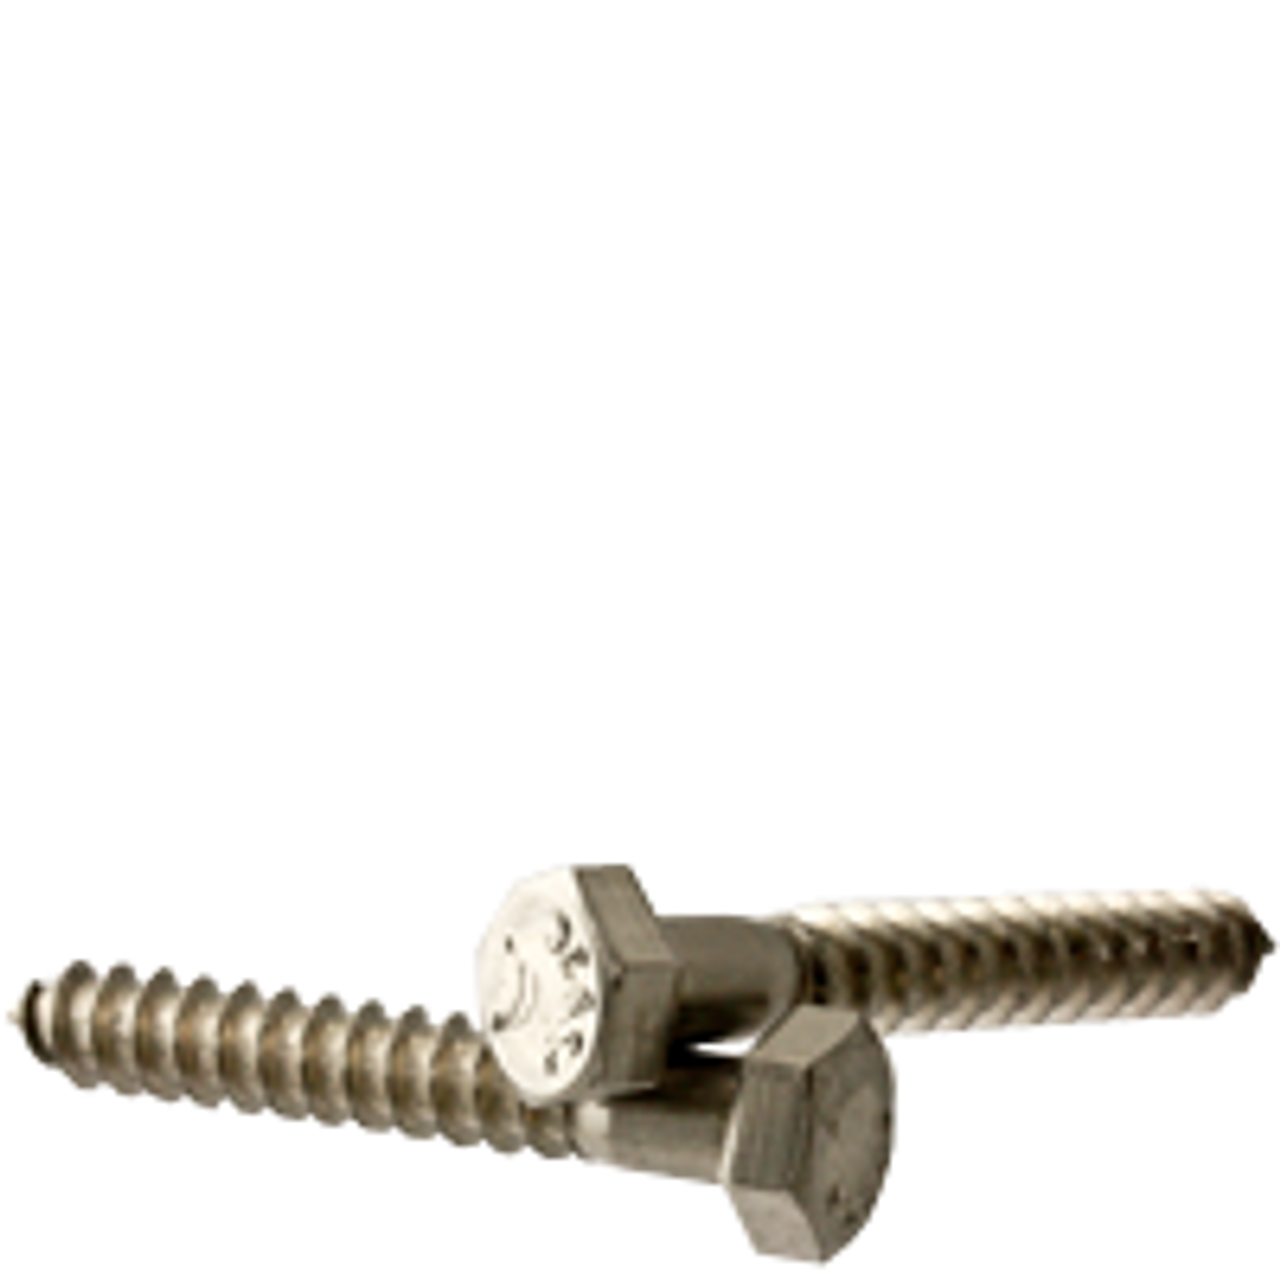 18-8 5/8-5 x 3 1/2 HEX LAG SCREWS COARSE STAIN A2 Quantity: 25 Inch ,,Size: 5/8-5,Length: 3-1/2,Head: Hex,Drive: External Hex,stainless_steel_18-8,Thread Type: UNC